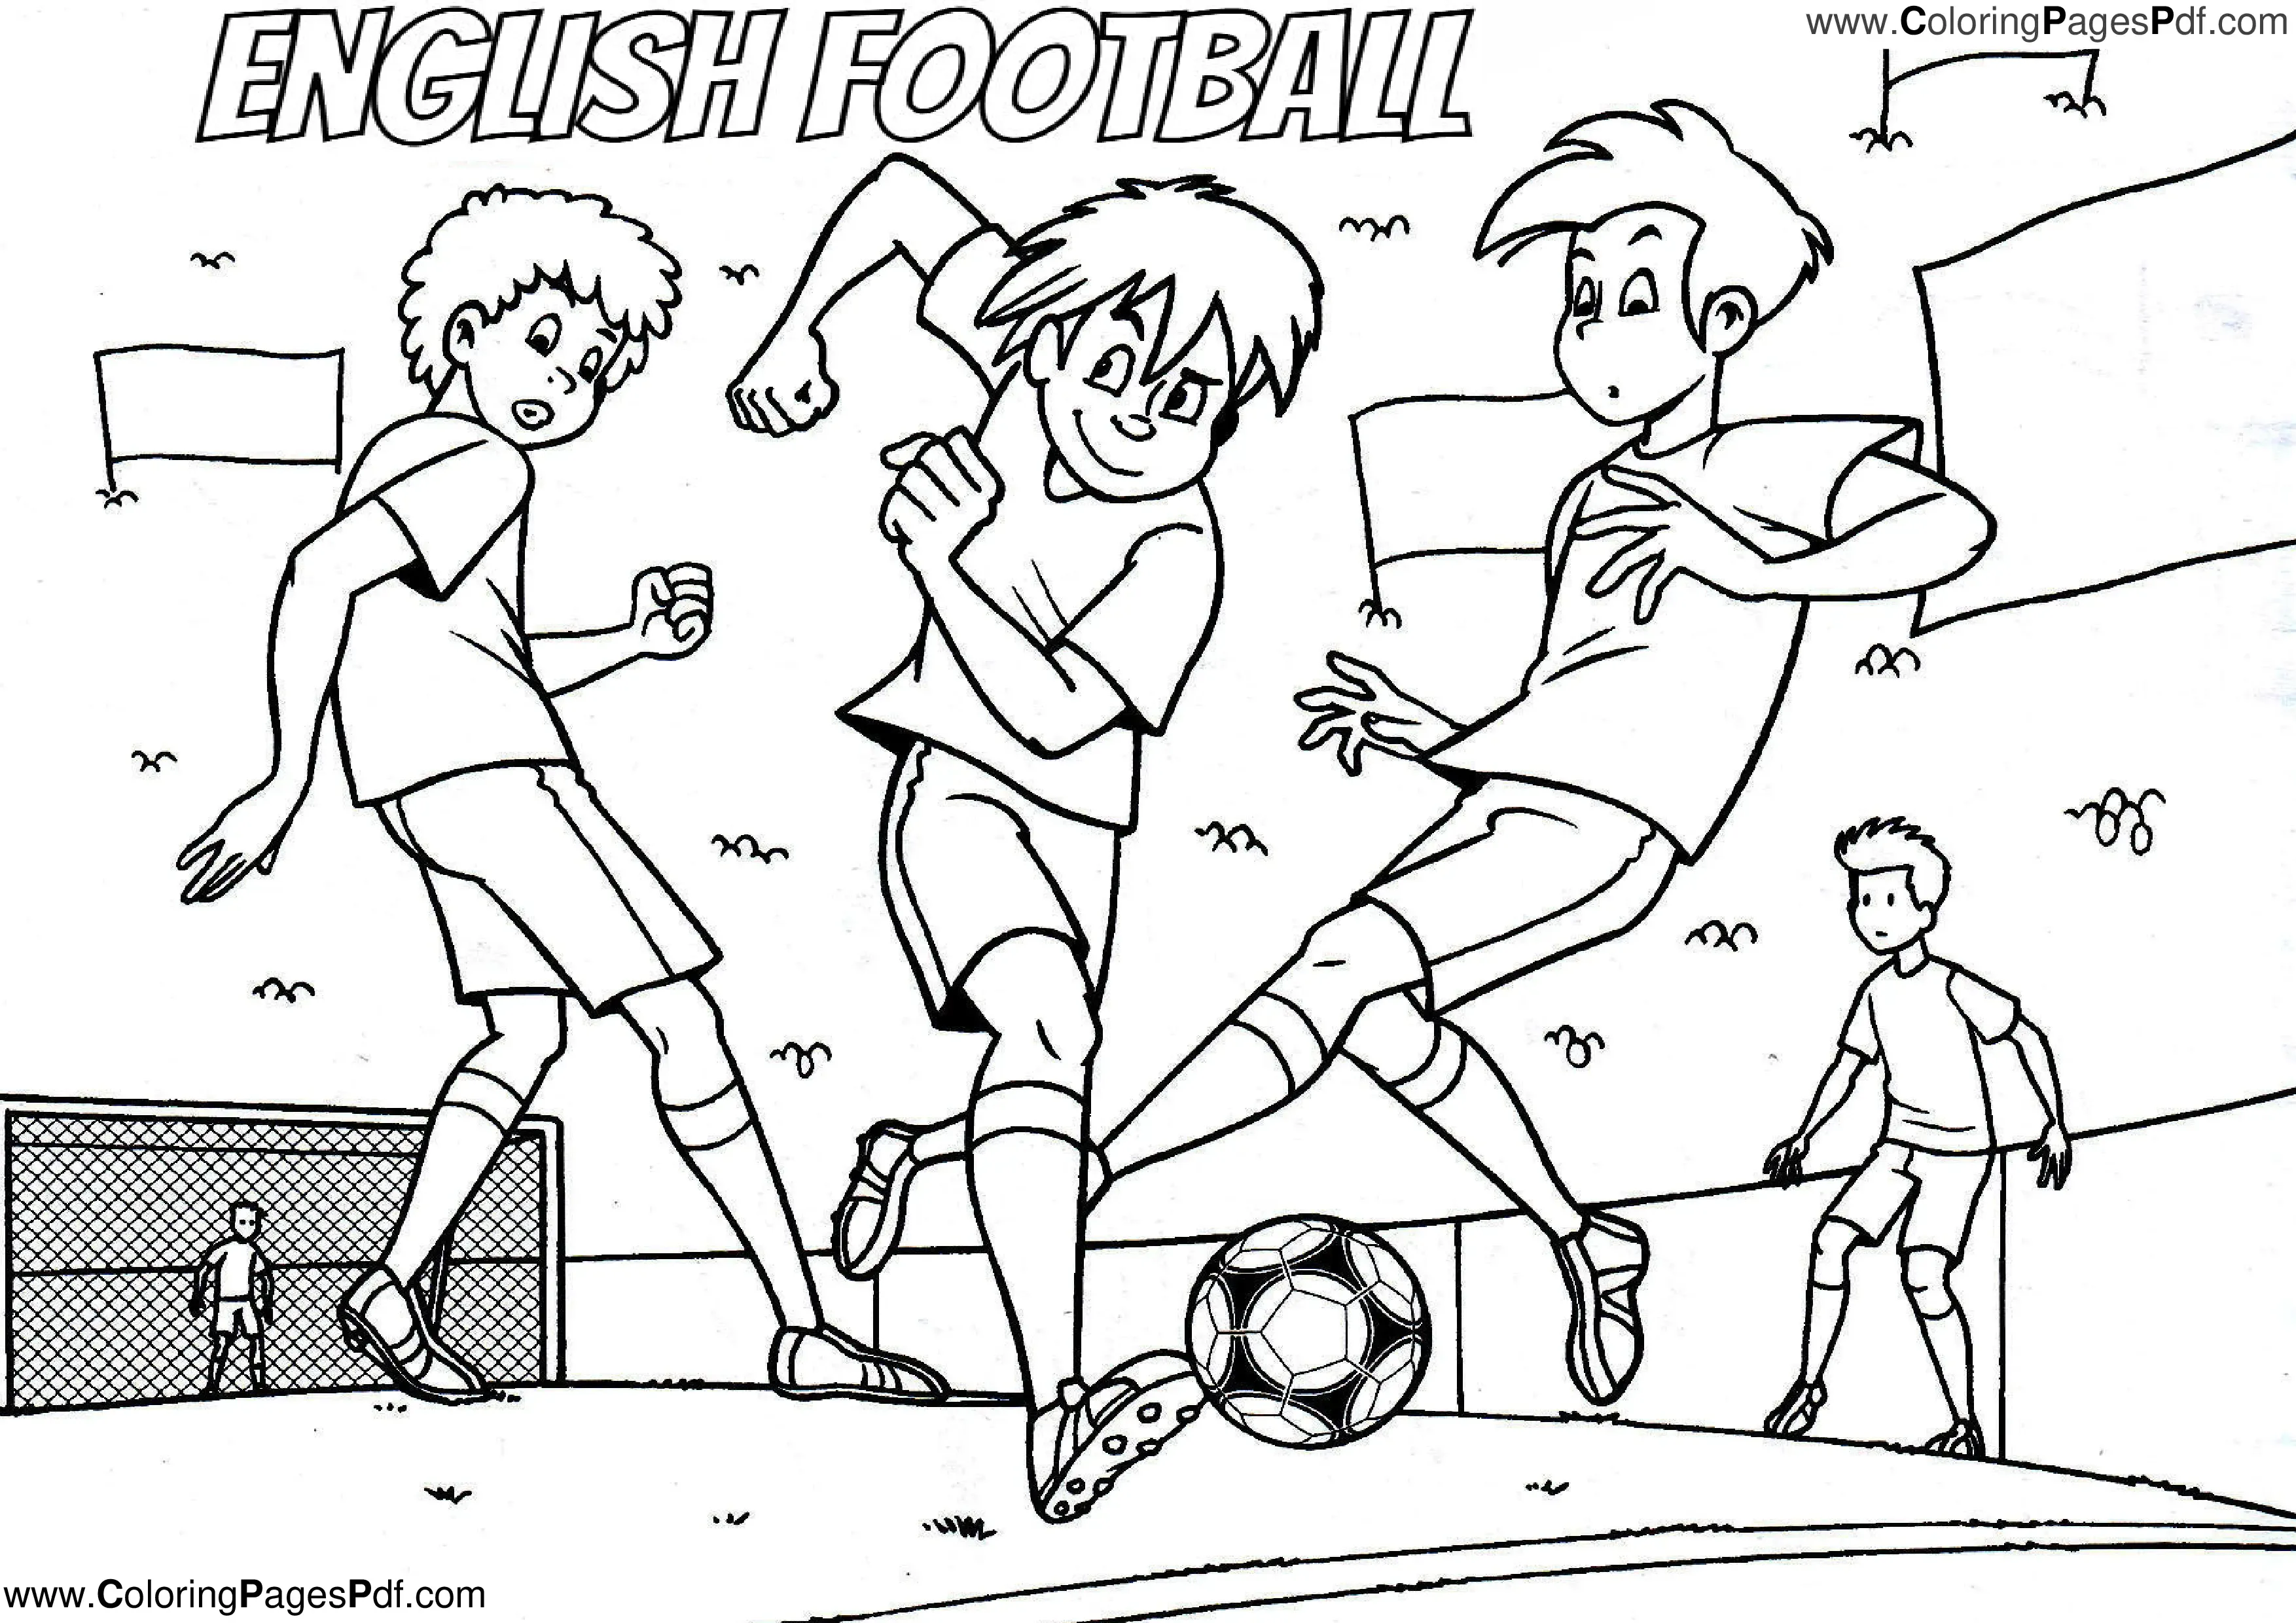 English football coloring pages